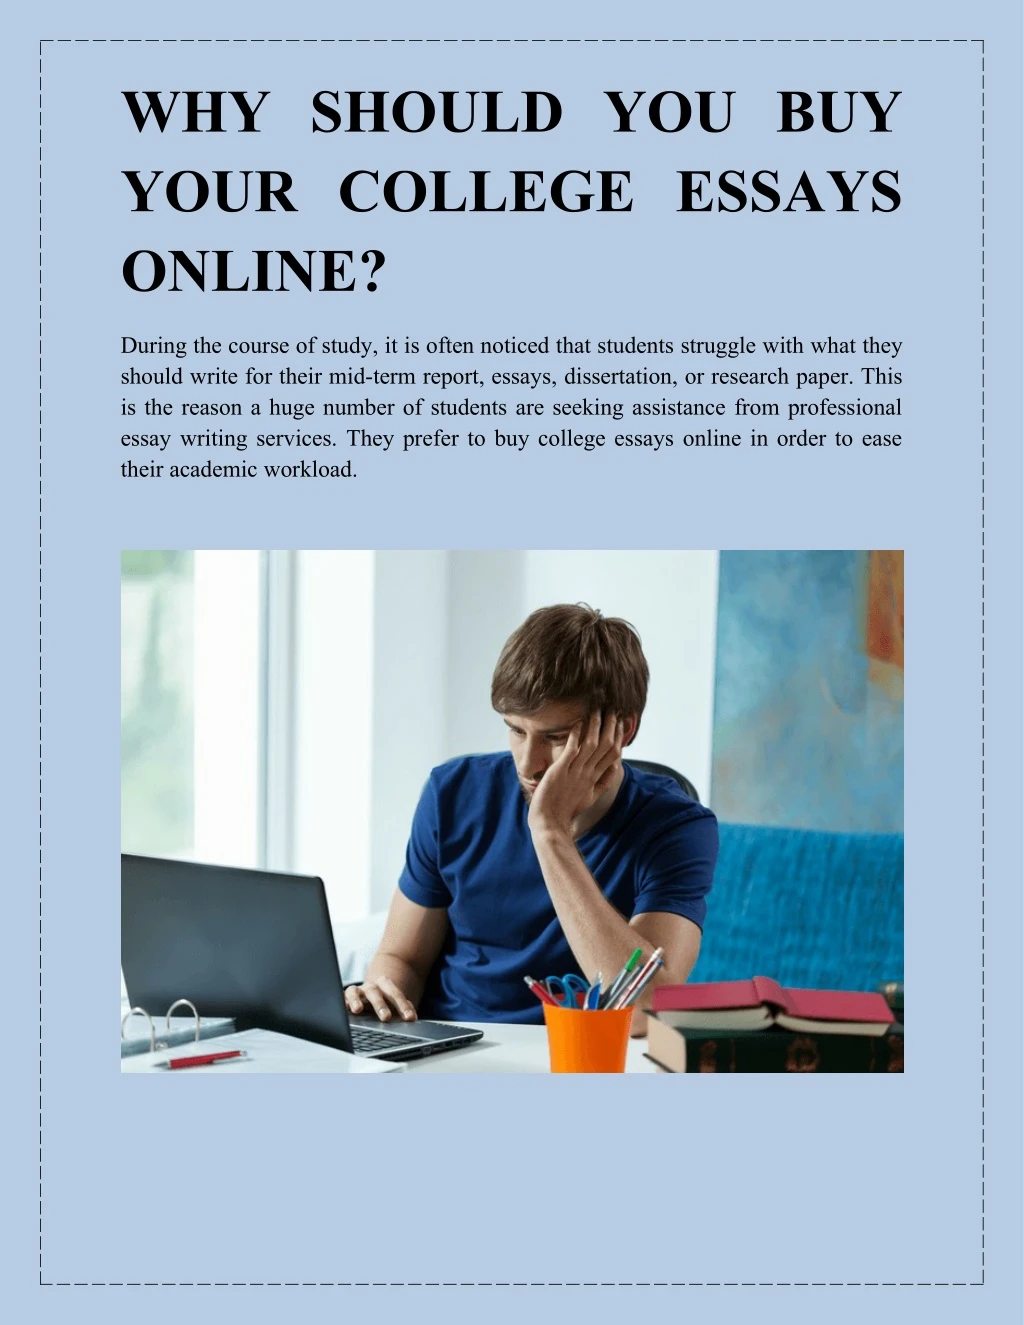 why should you buy your college essays online